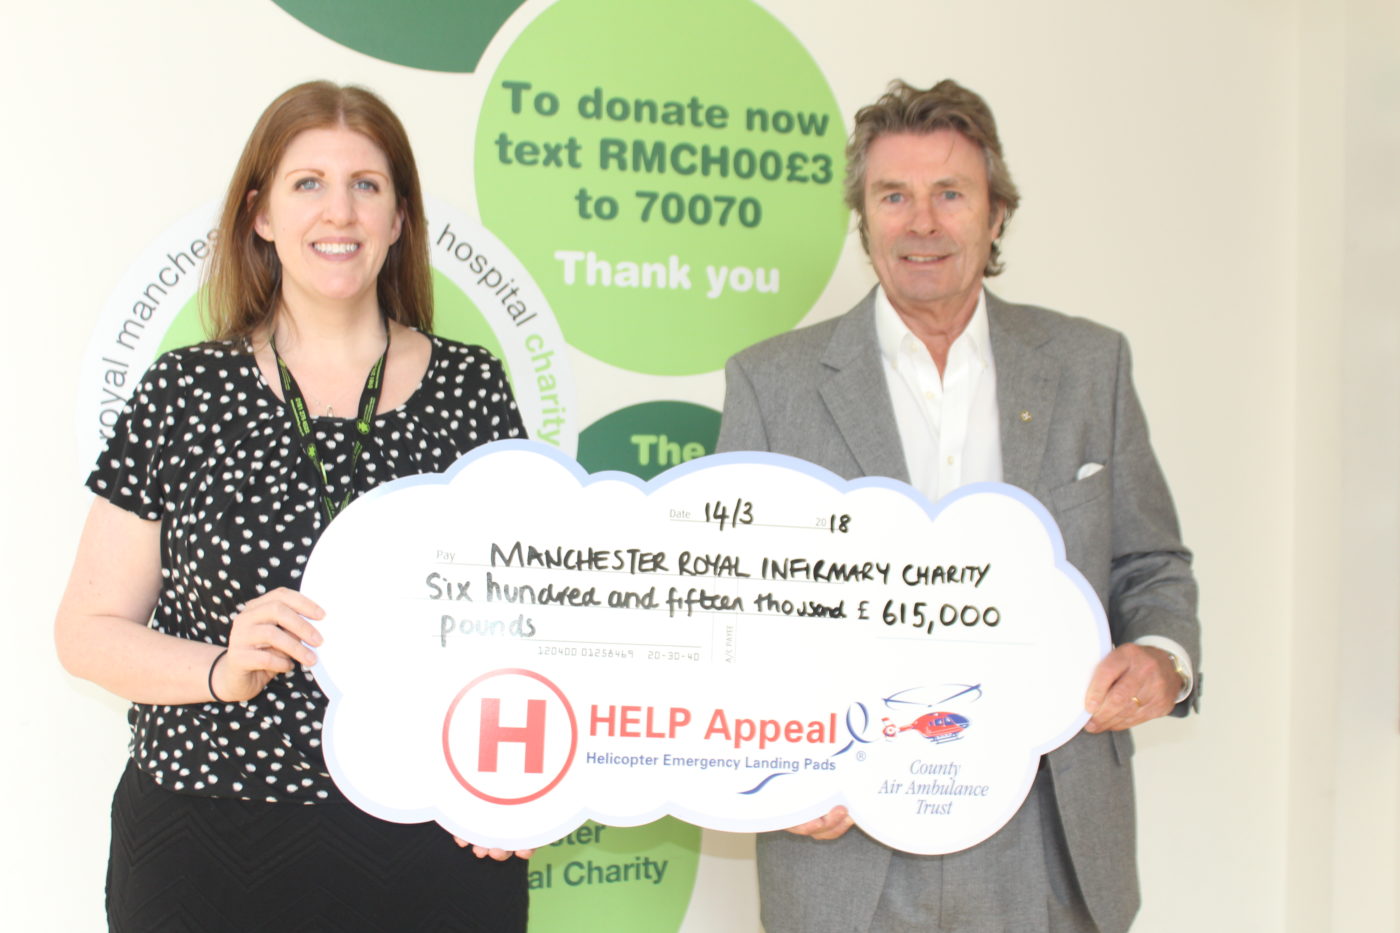 “The HELP Appeal is keen for helipads across the country to have this state-of-the-art technology in place to ensure the highest level of safety whilst enabling the hospital to save money," said Robert Bertram, chief executive officer of the HELP Appeal.